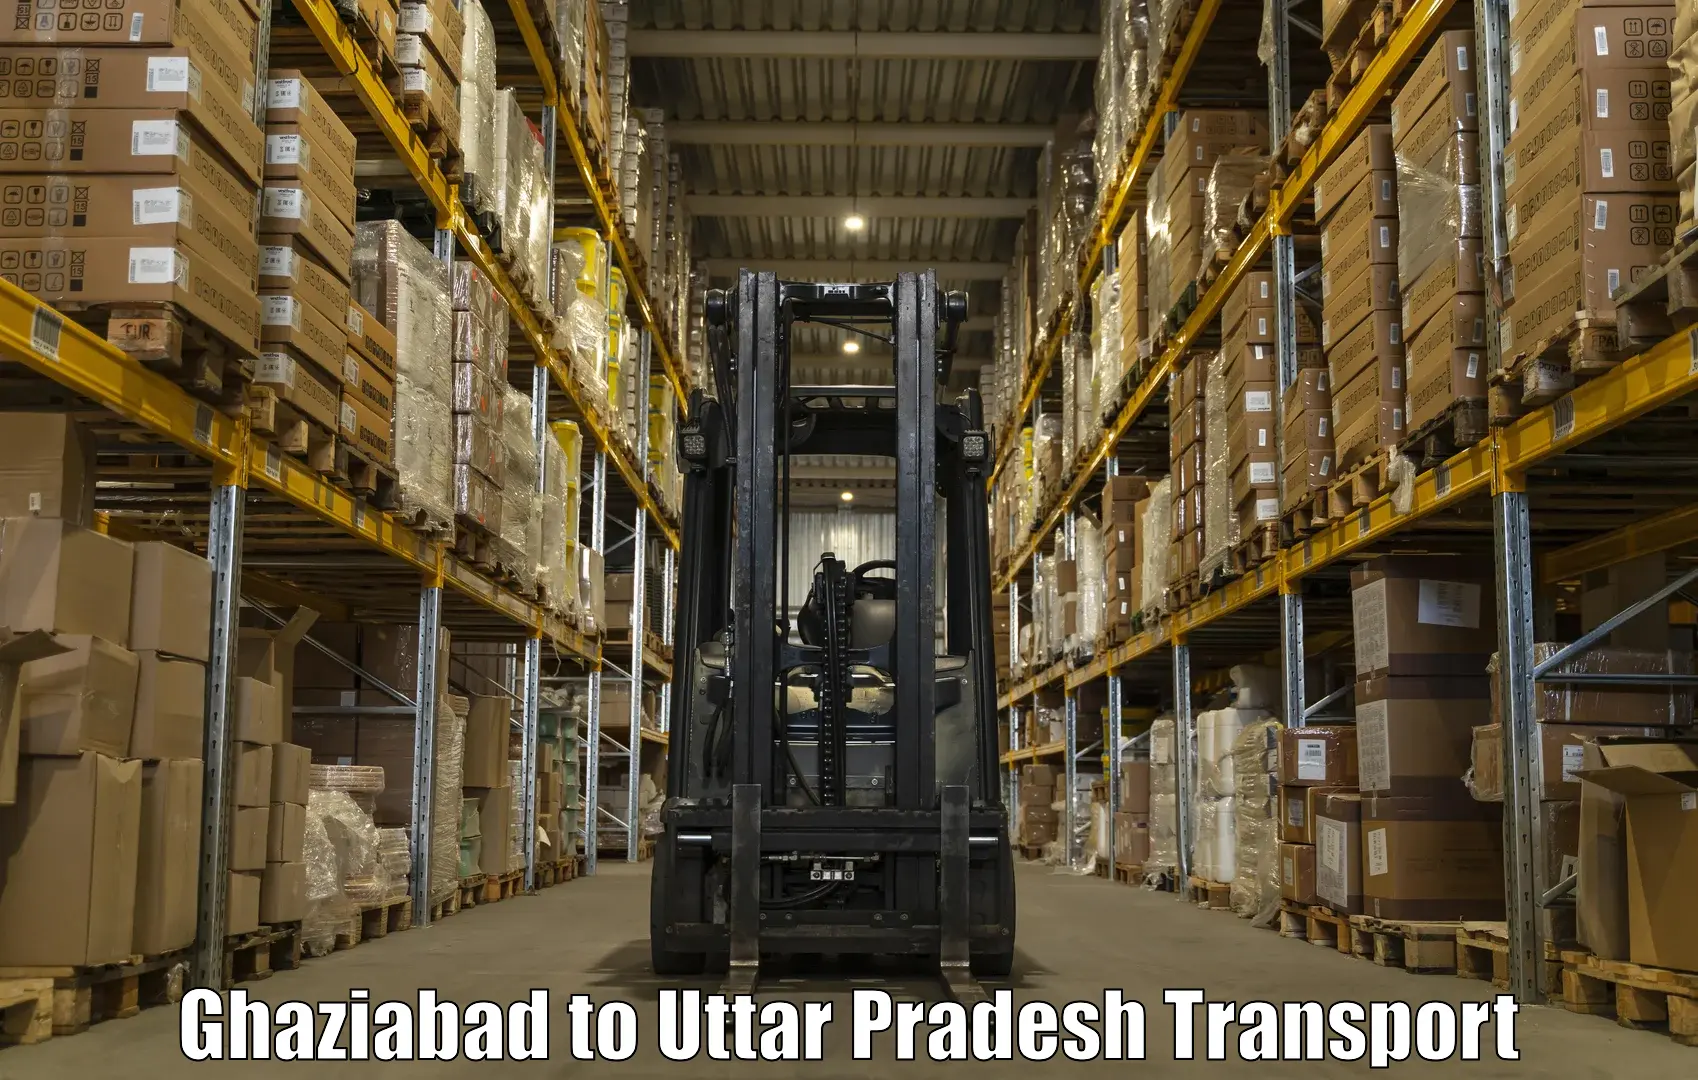 Daily parcel service transport Ghaziabad to Dadri